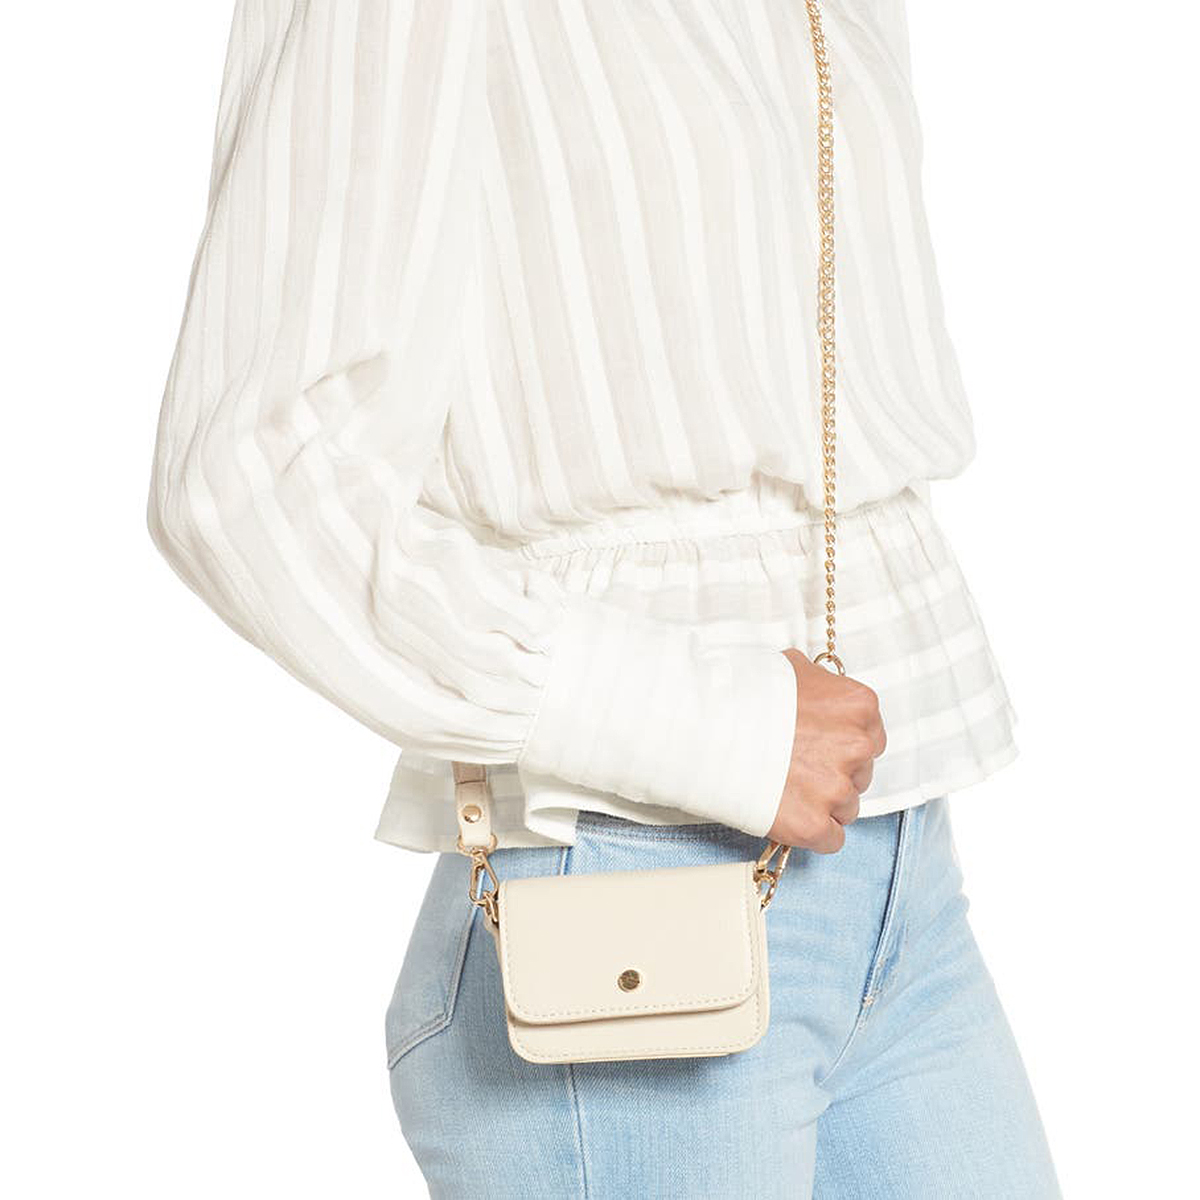 The 29 best crossbody bags to shop now for every budget